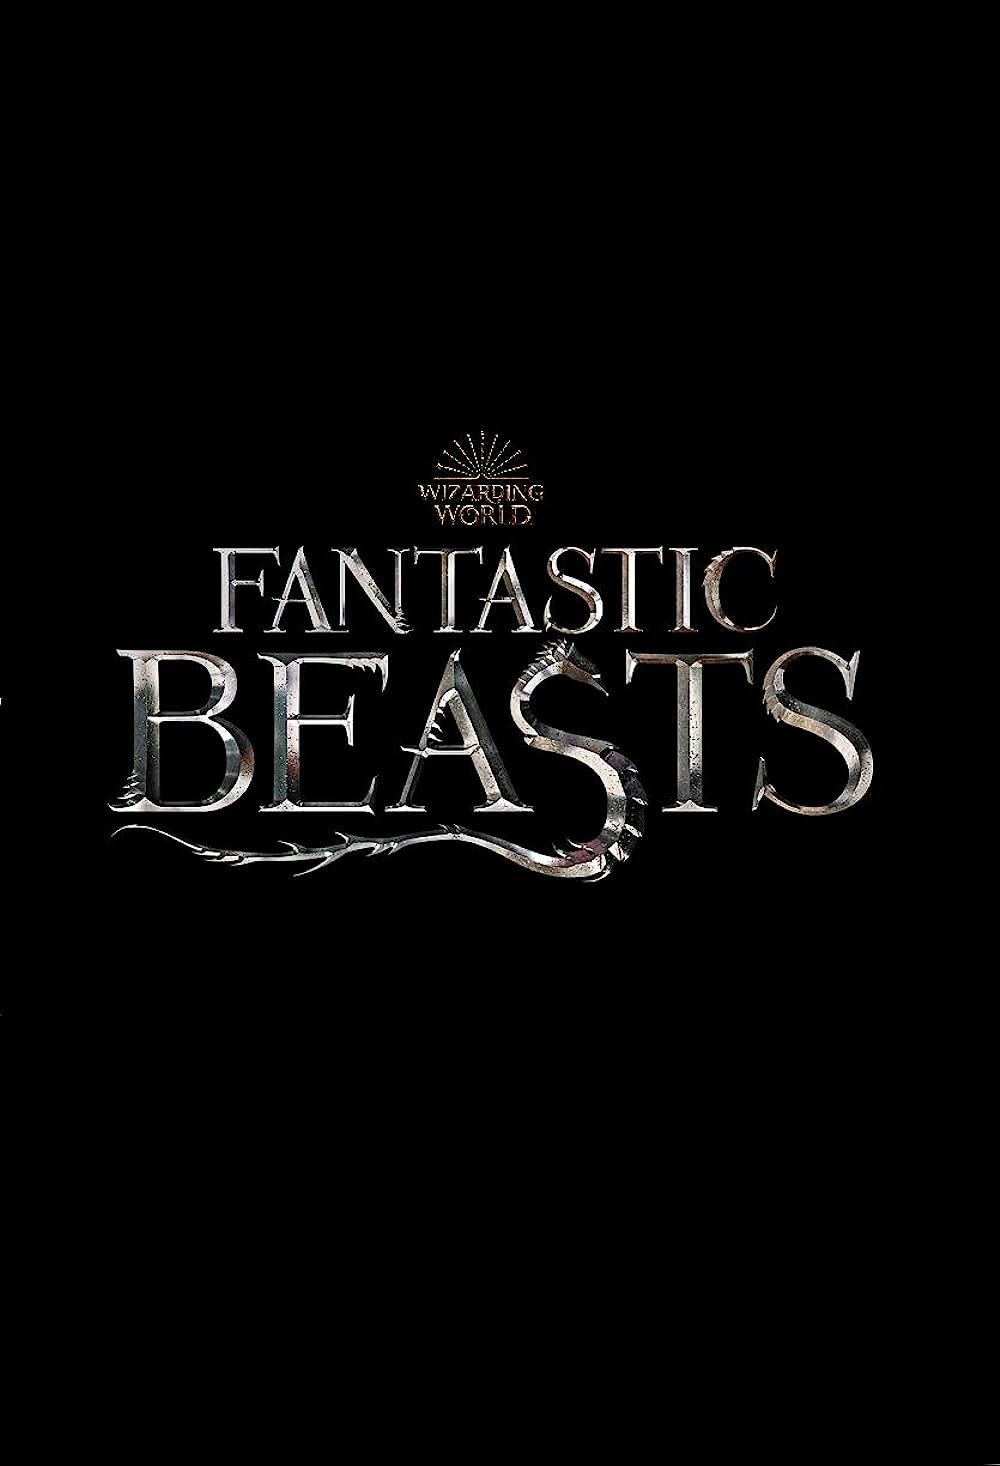 Fantastic Beasts and Where to Find Them 4 poster